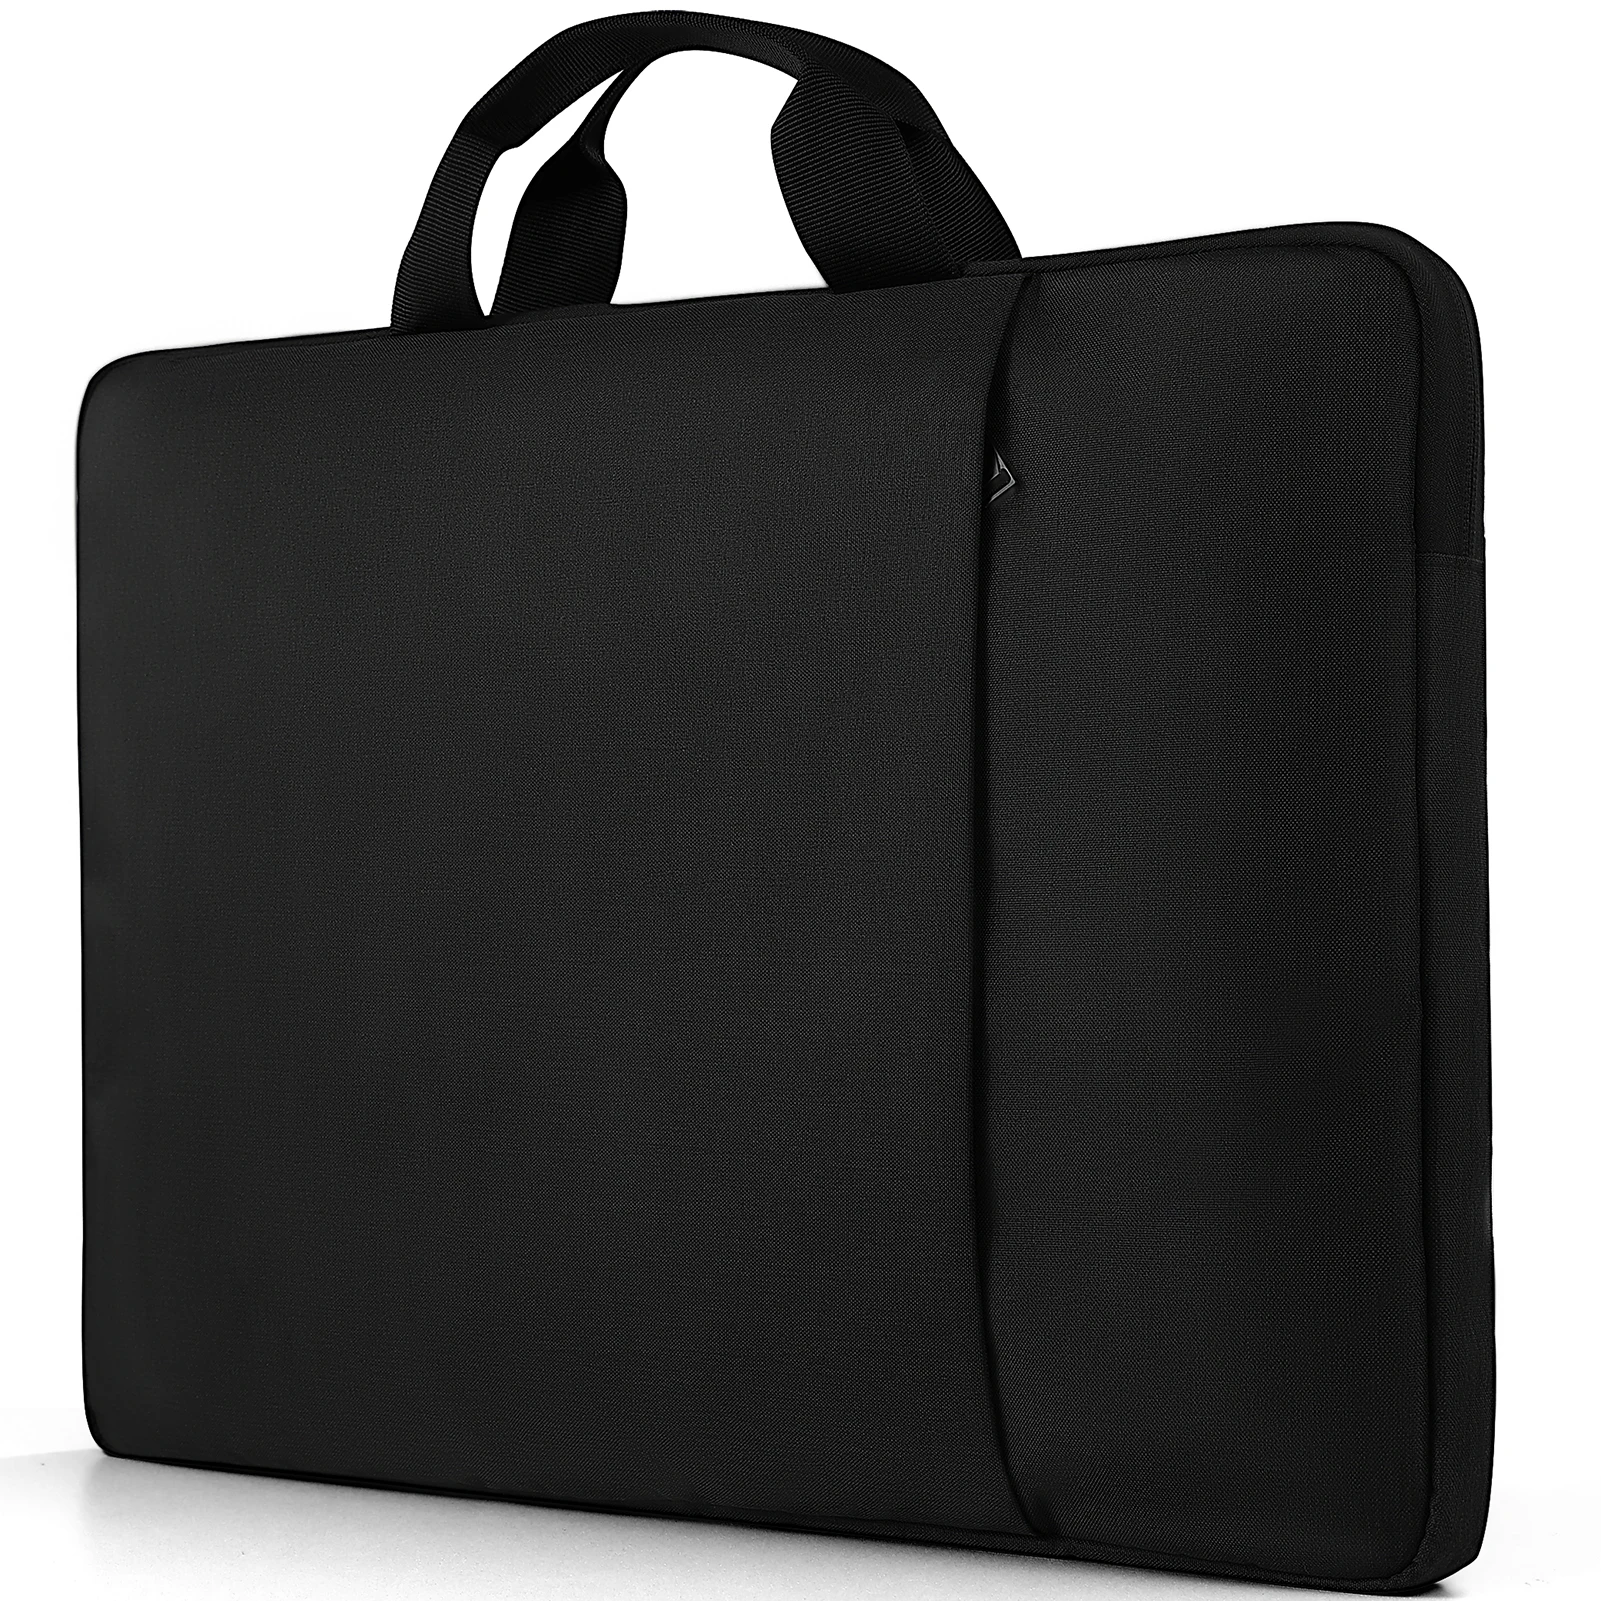 Polyester Laptop Bag Sleeve Protective Case Vertic...